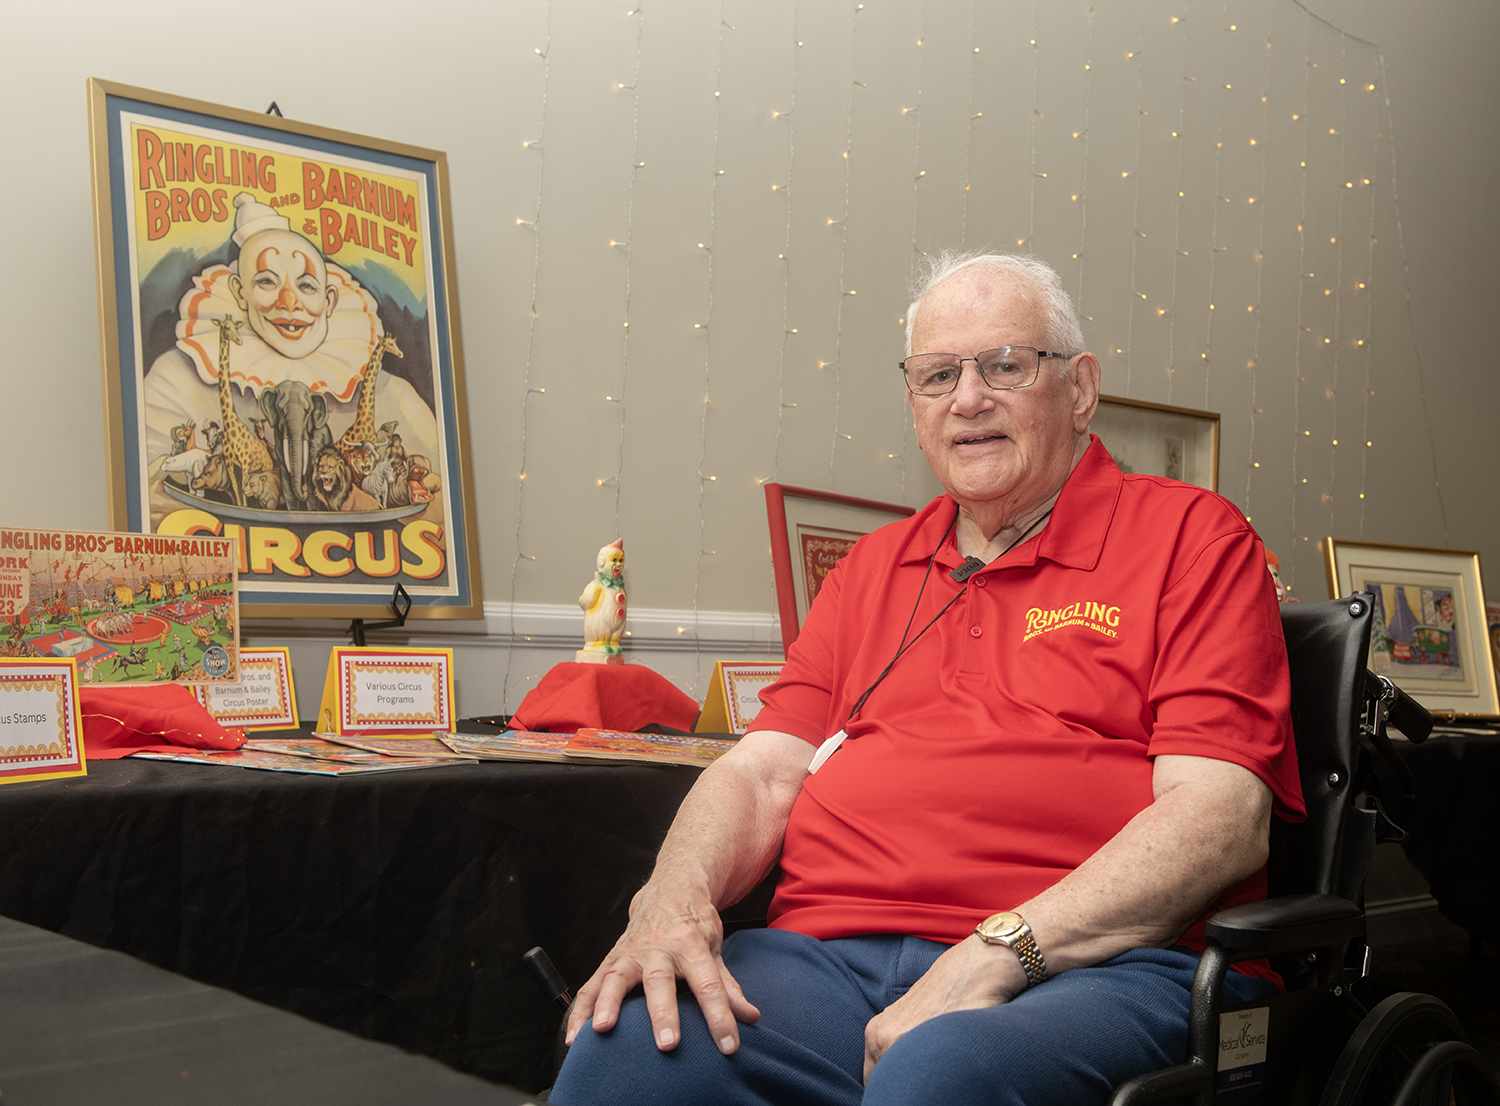 Independence Village of Aurora makes resident's dream a reality with circus display